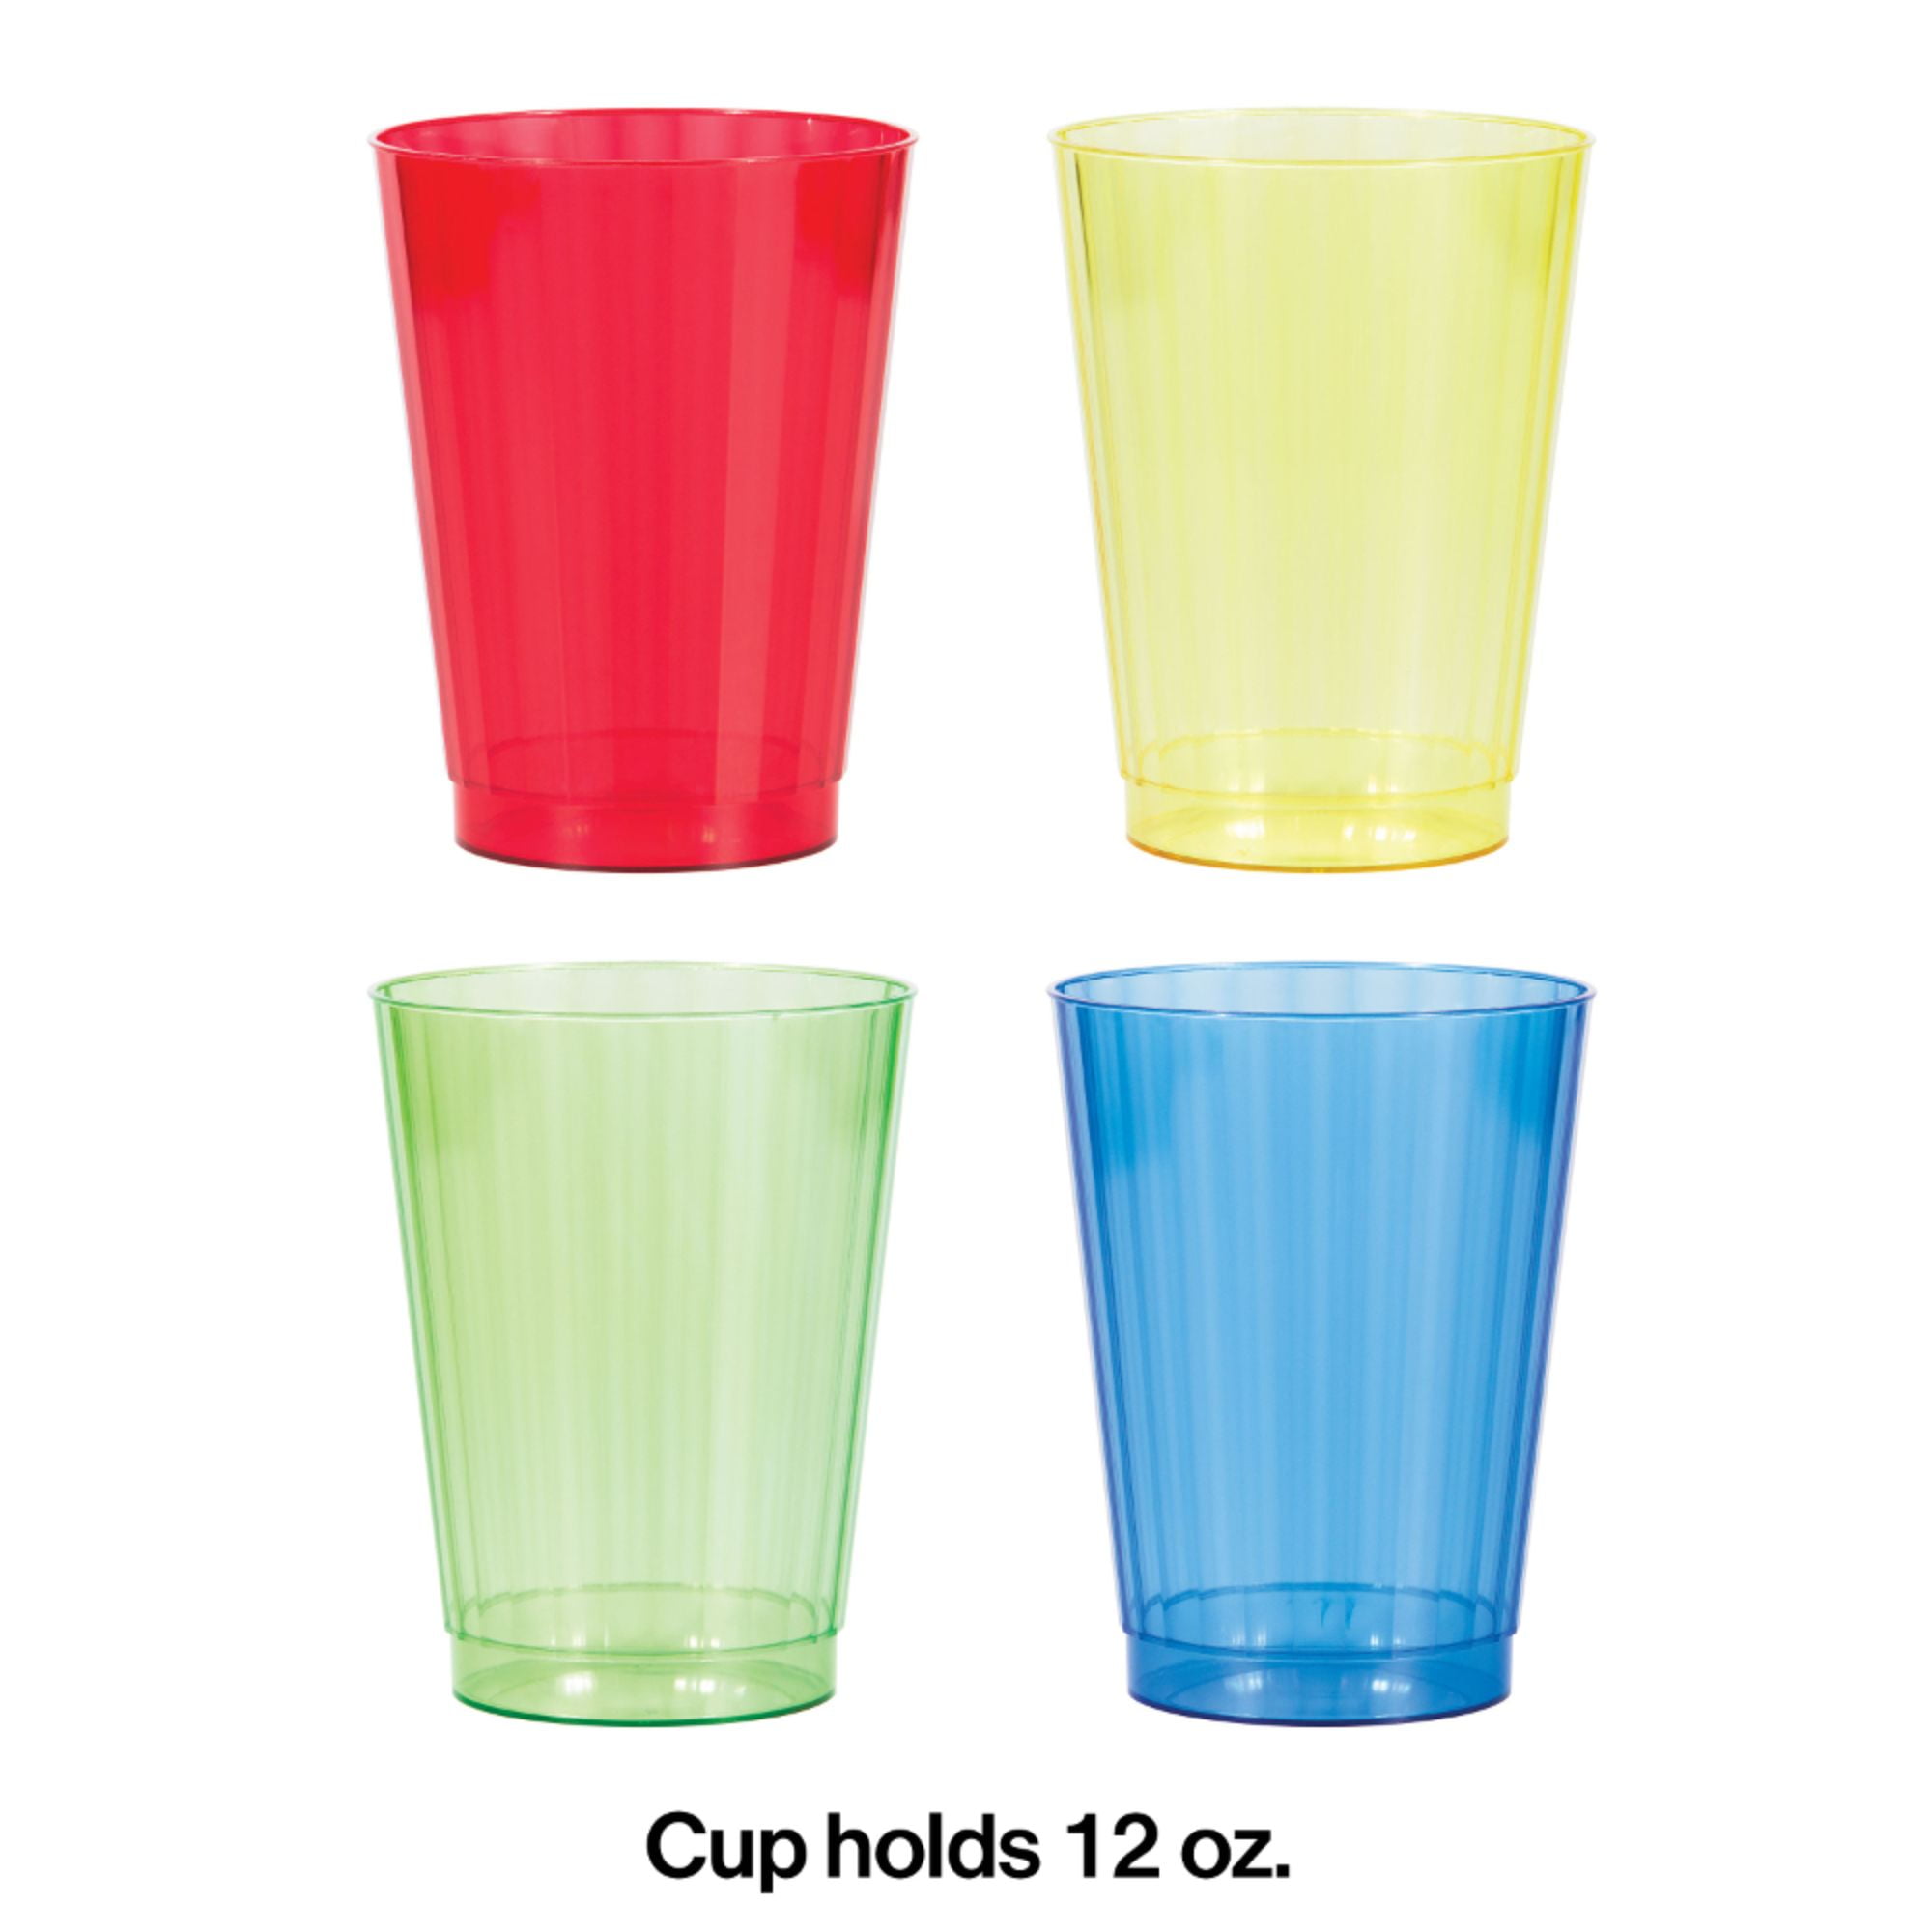 Touch of Color 16 oz Plastic Cups, Coral - 20 count